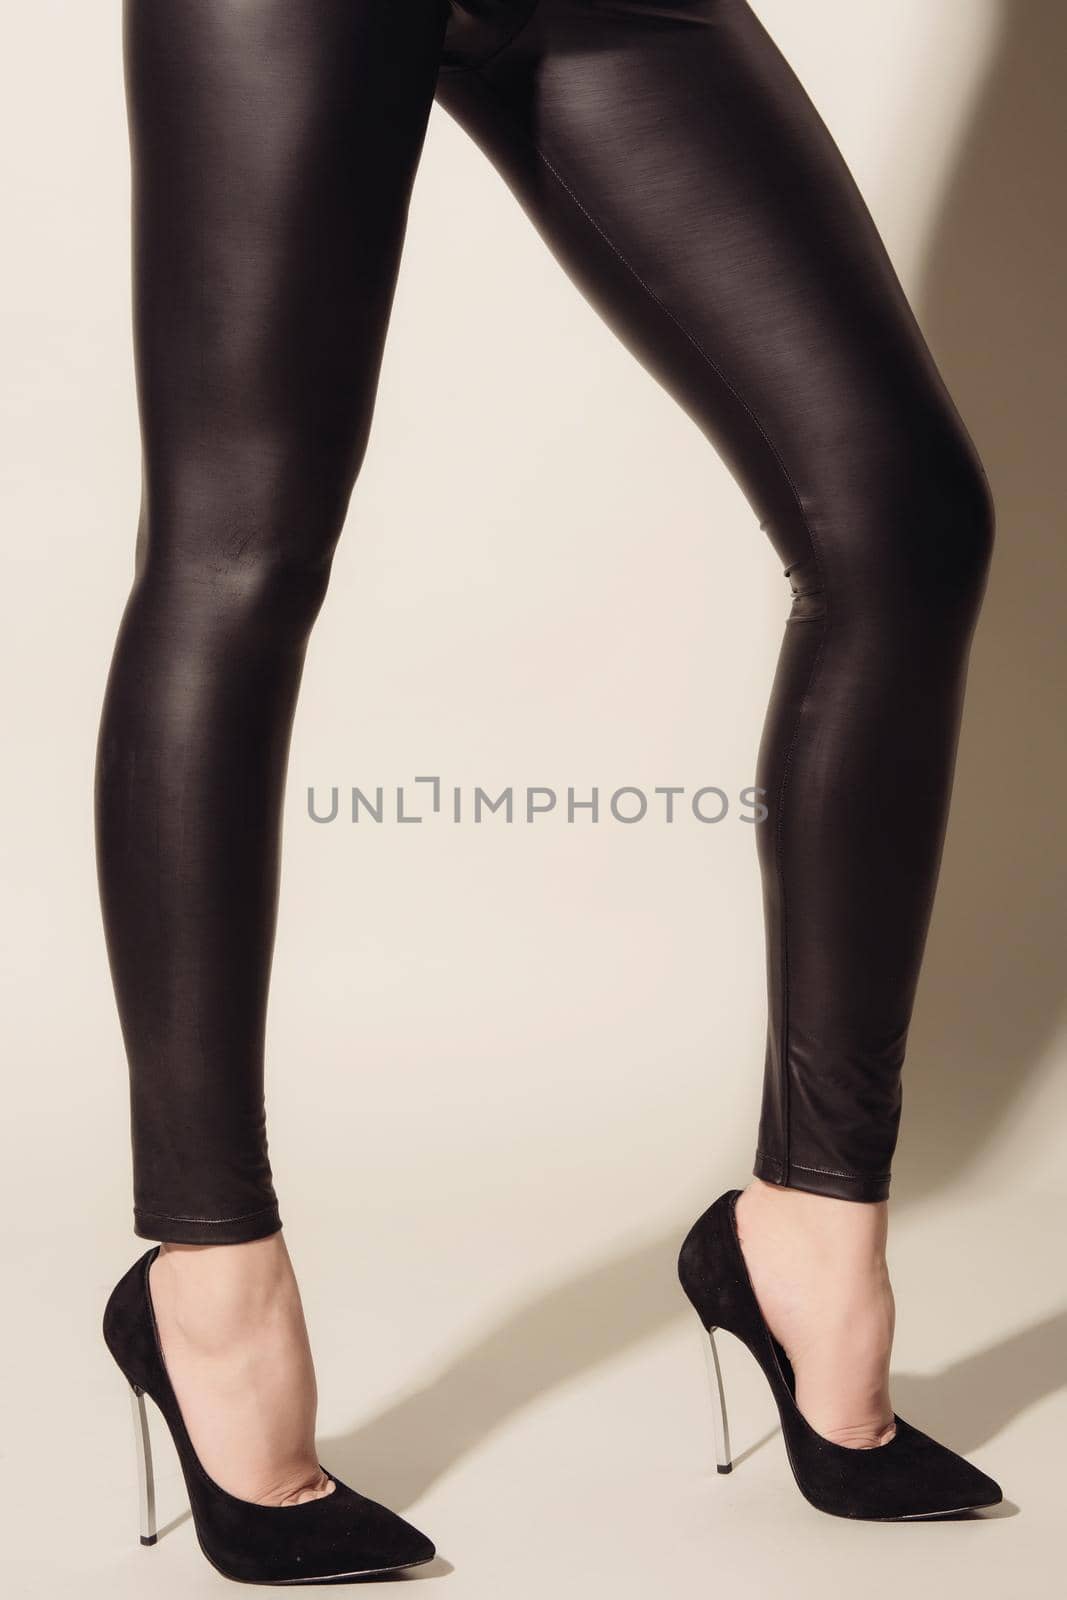 Women's legs in black tight-fitting leather trousers and high-heeled shoes standing on grey background